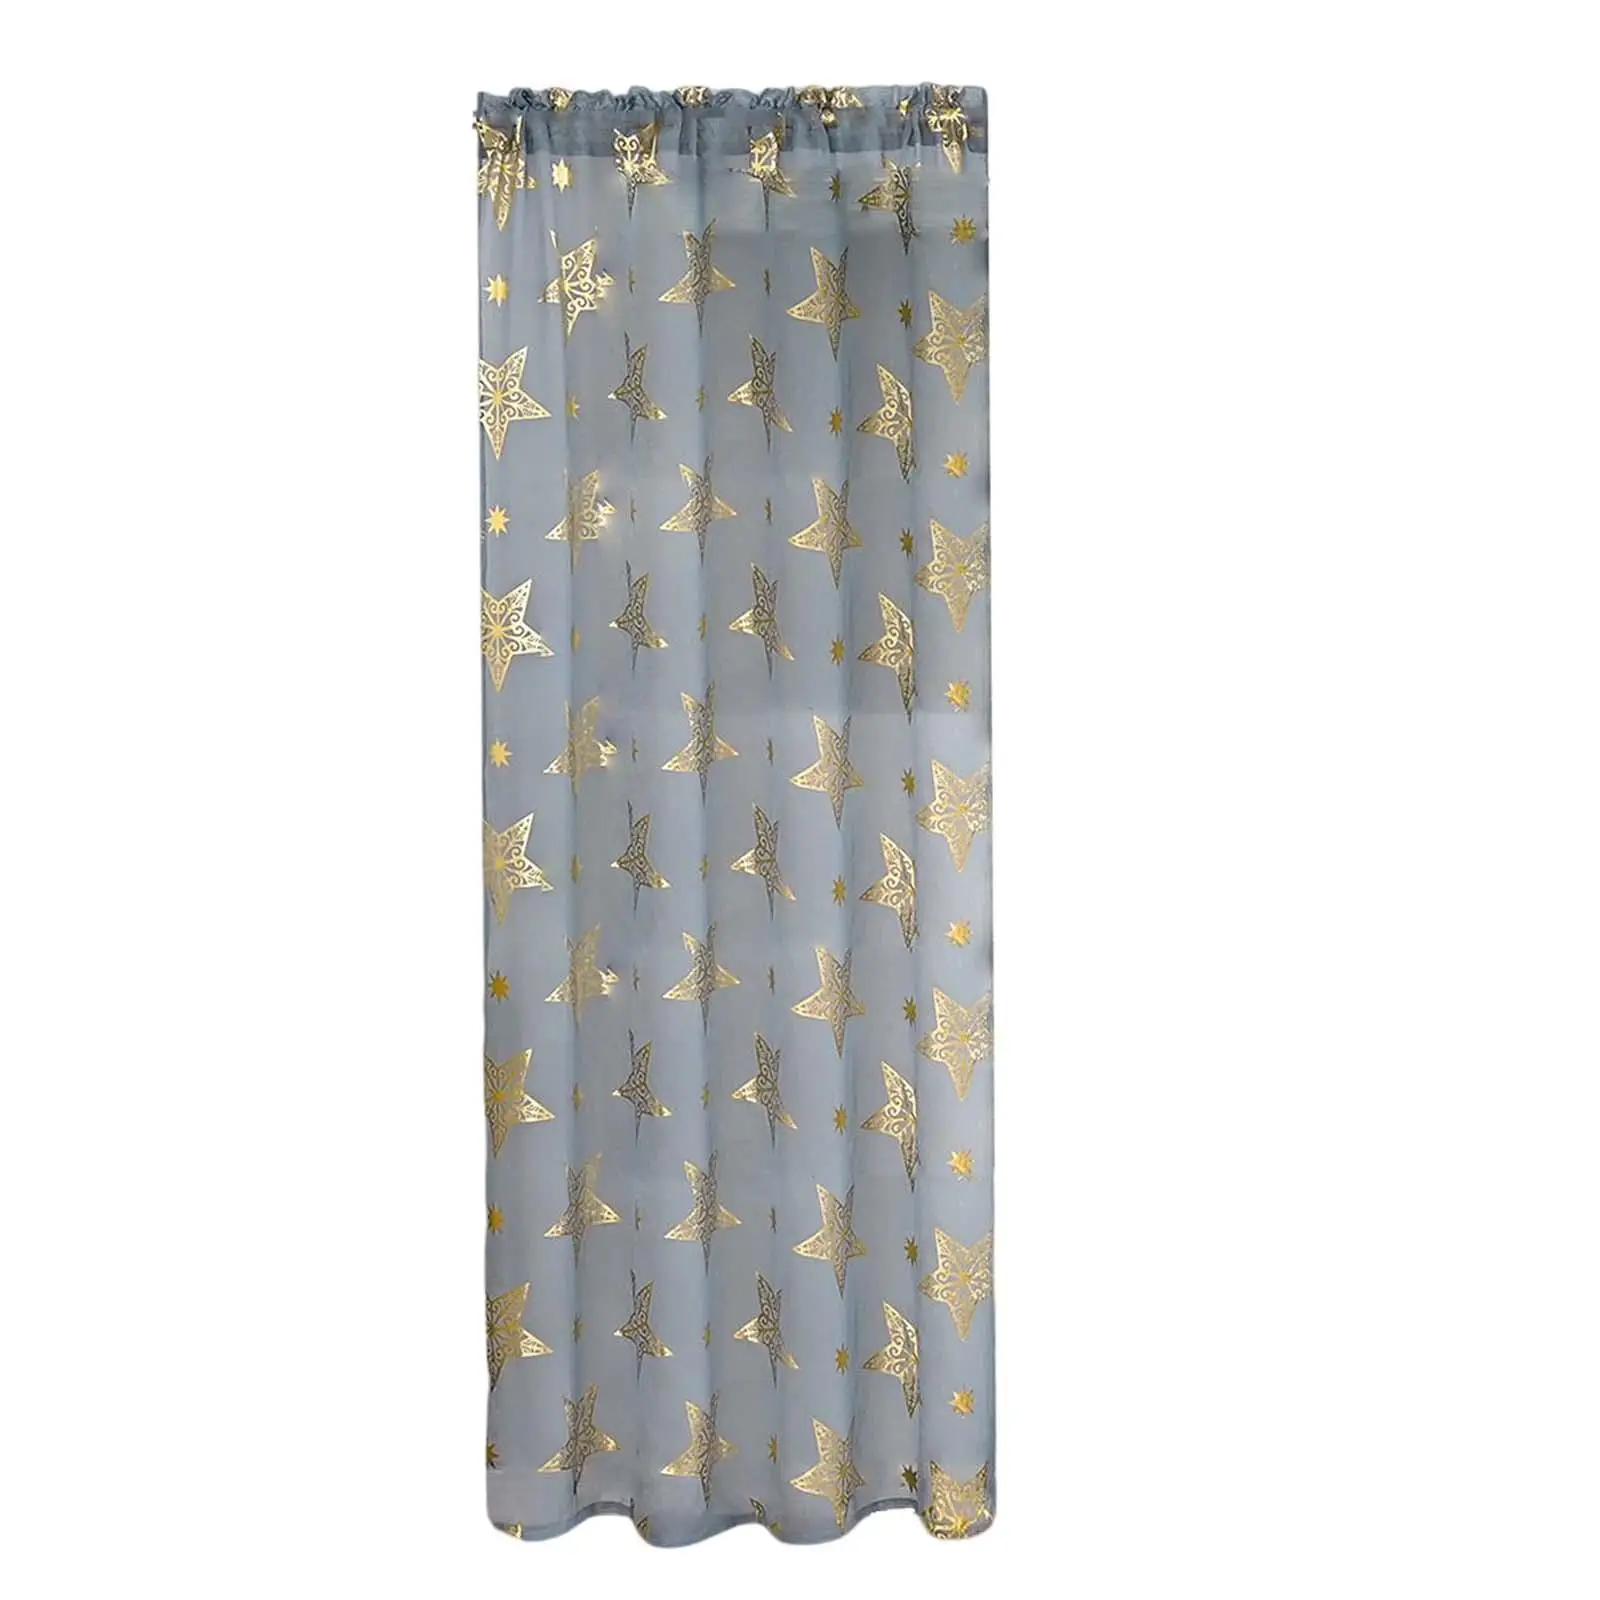 Voile Curtains Translucent Privacy Voile Drapes Star Printed for Living Room